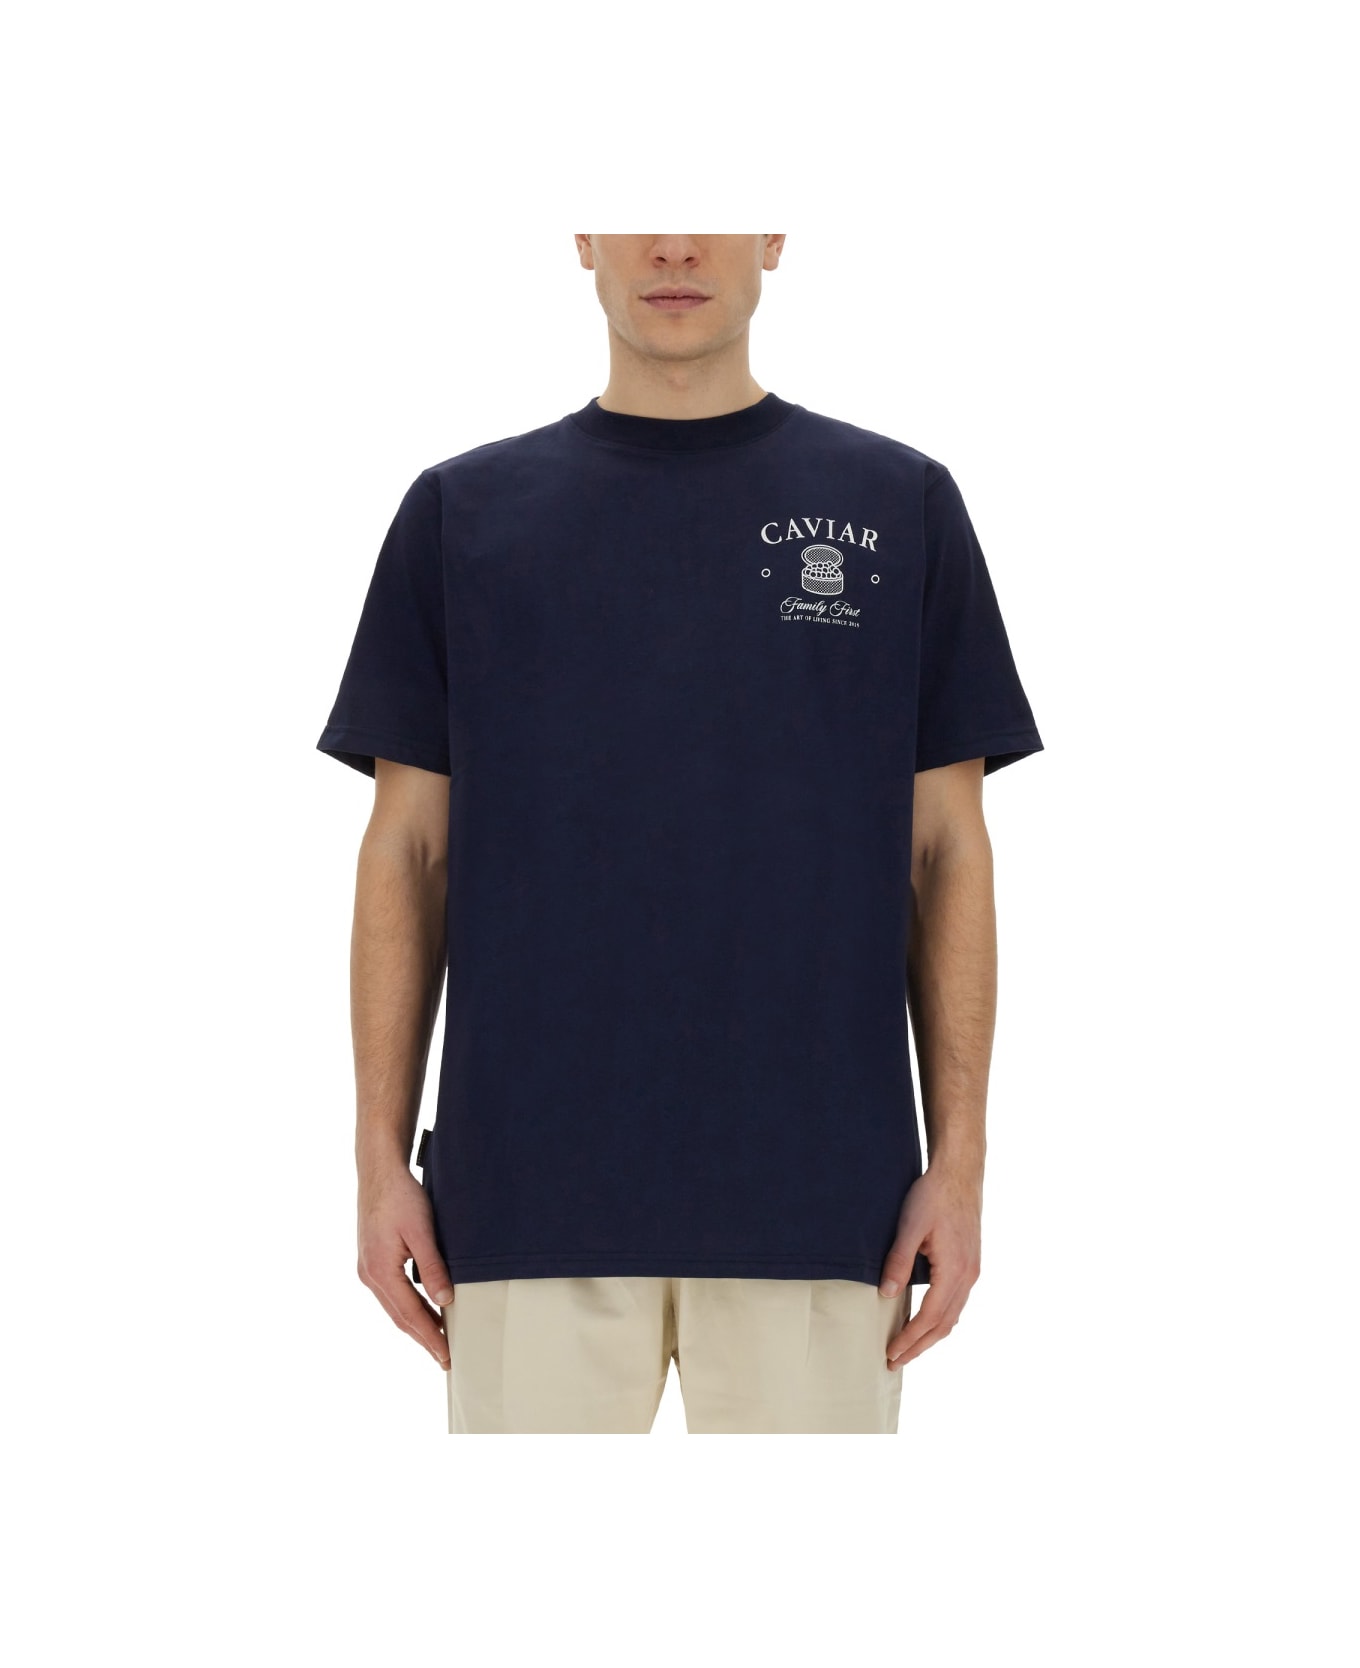 Family First Milano T-shirt With "caviar" Print - BLUE シャツ